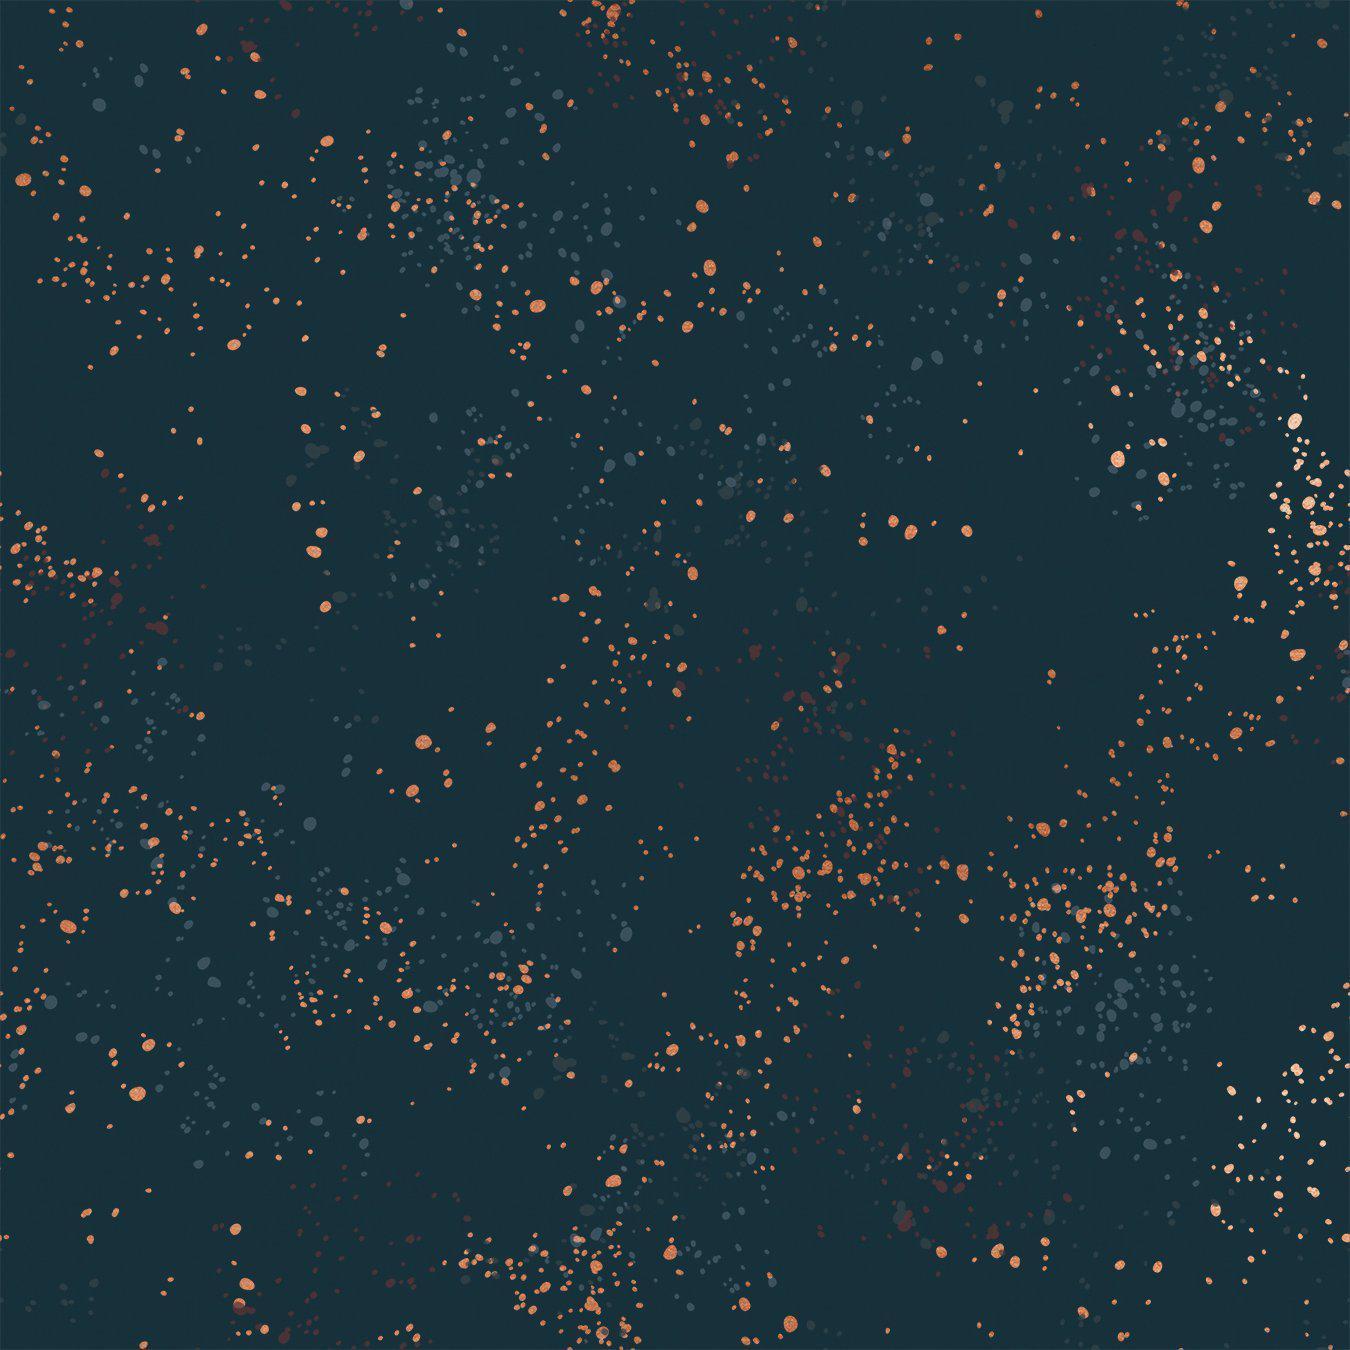 Ruby Star Society-REMNANT: Speckled 55M Metallic Teal Navy 30% OFF 1.16 YDS-fabric remnant-gather here online